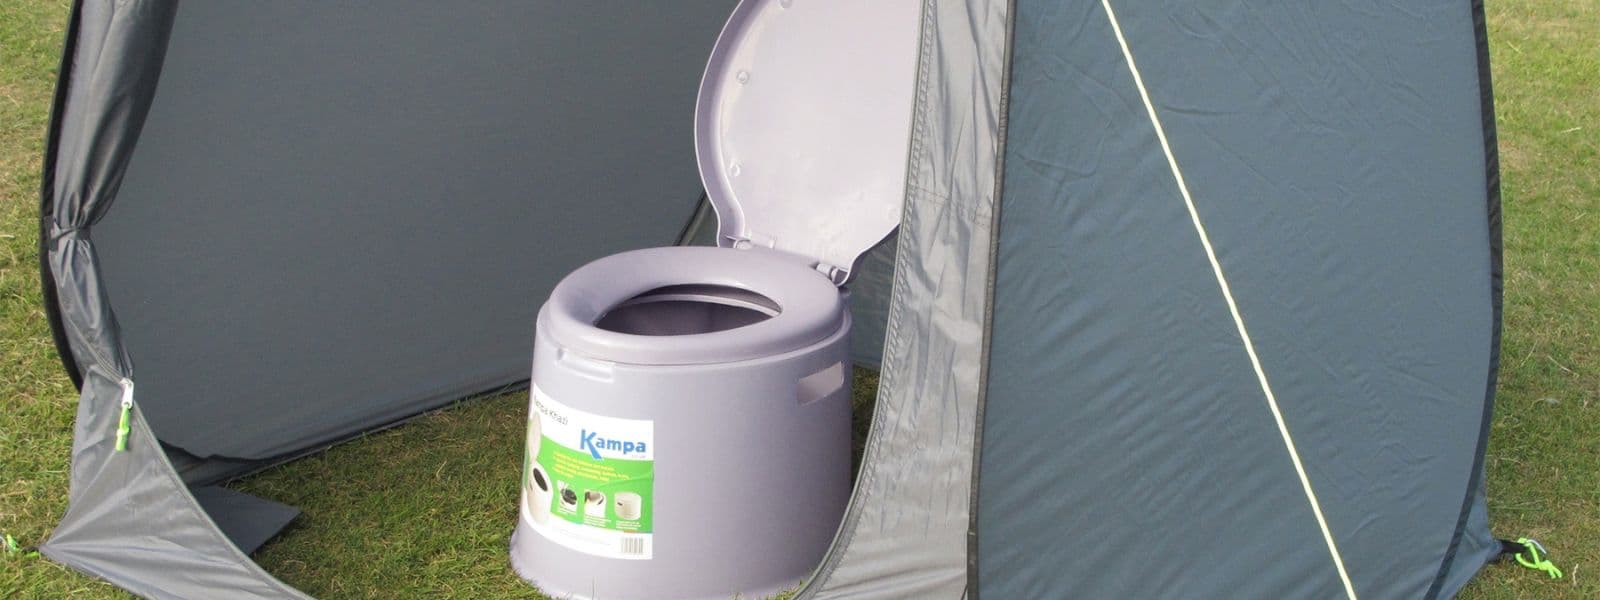 Camping Toilets - Bucket and Chuck it and Toilets with a Flush